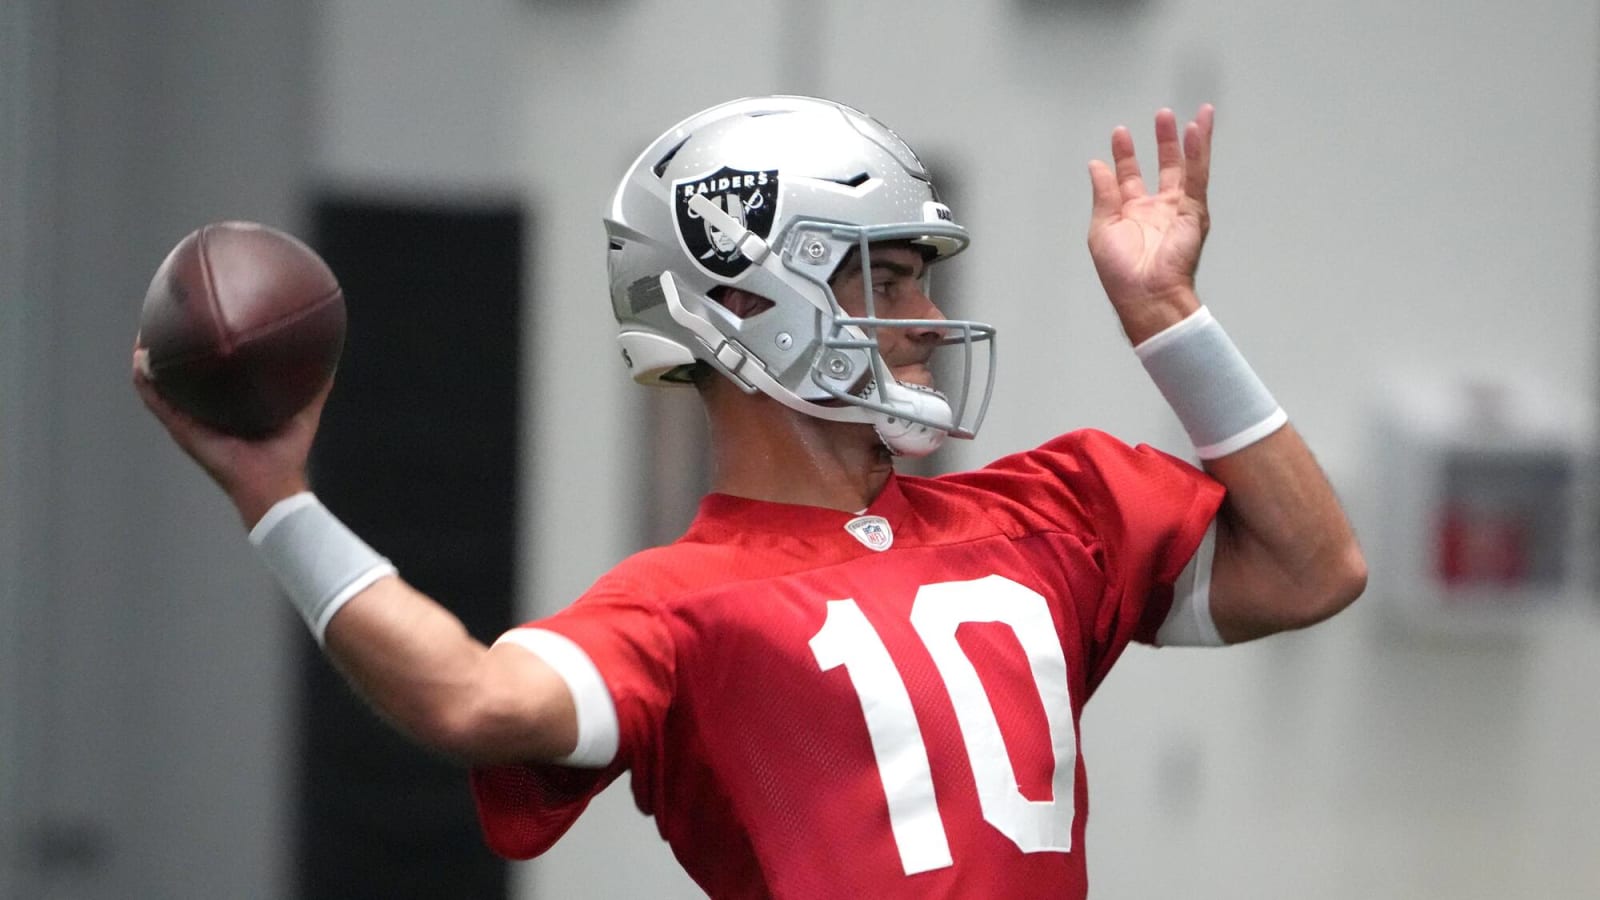 Raiders QB Jimmy Garoppolo 'excited' for joint practices with 49ers